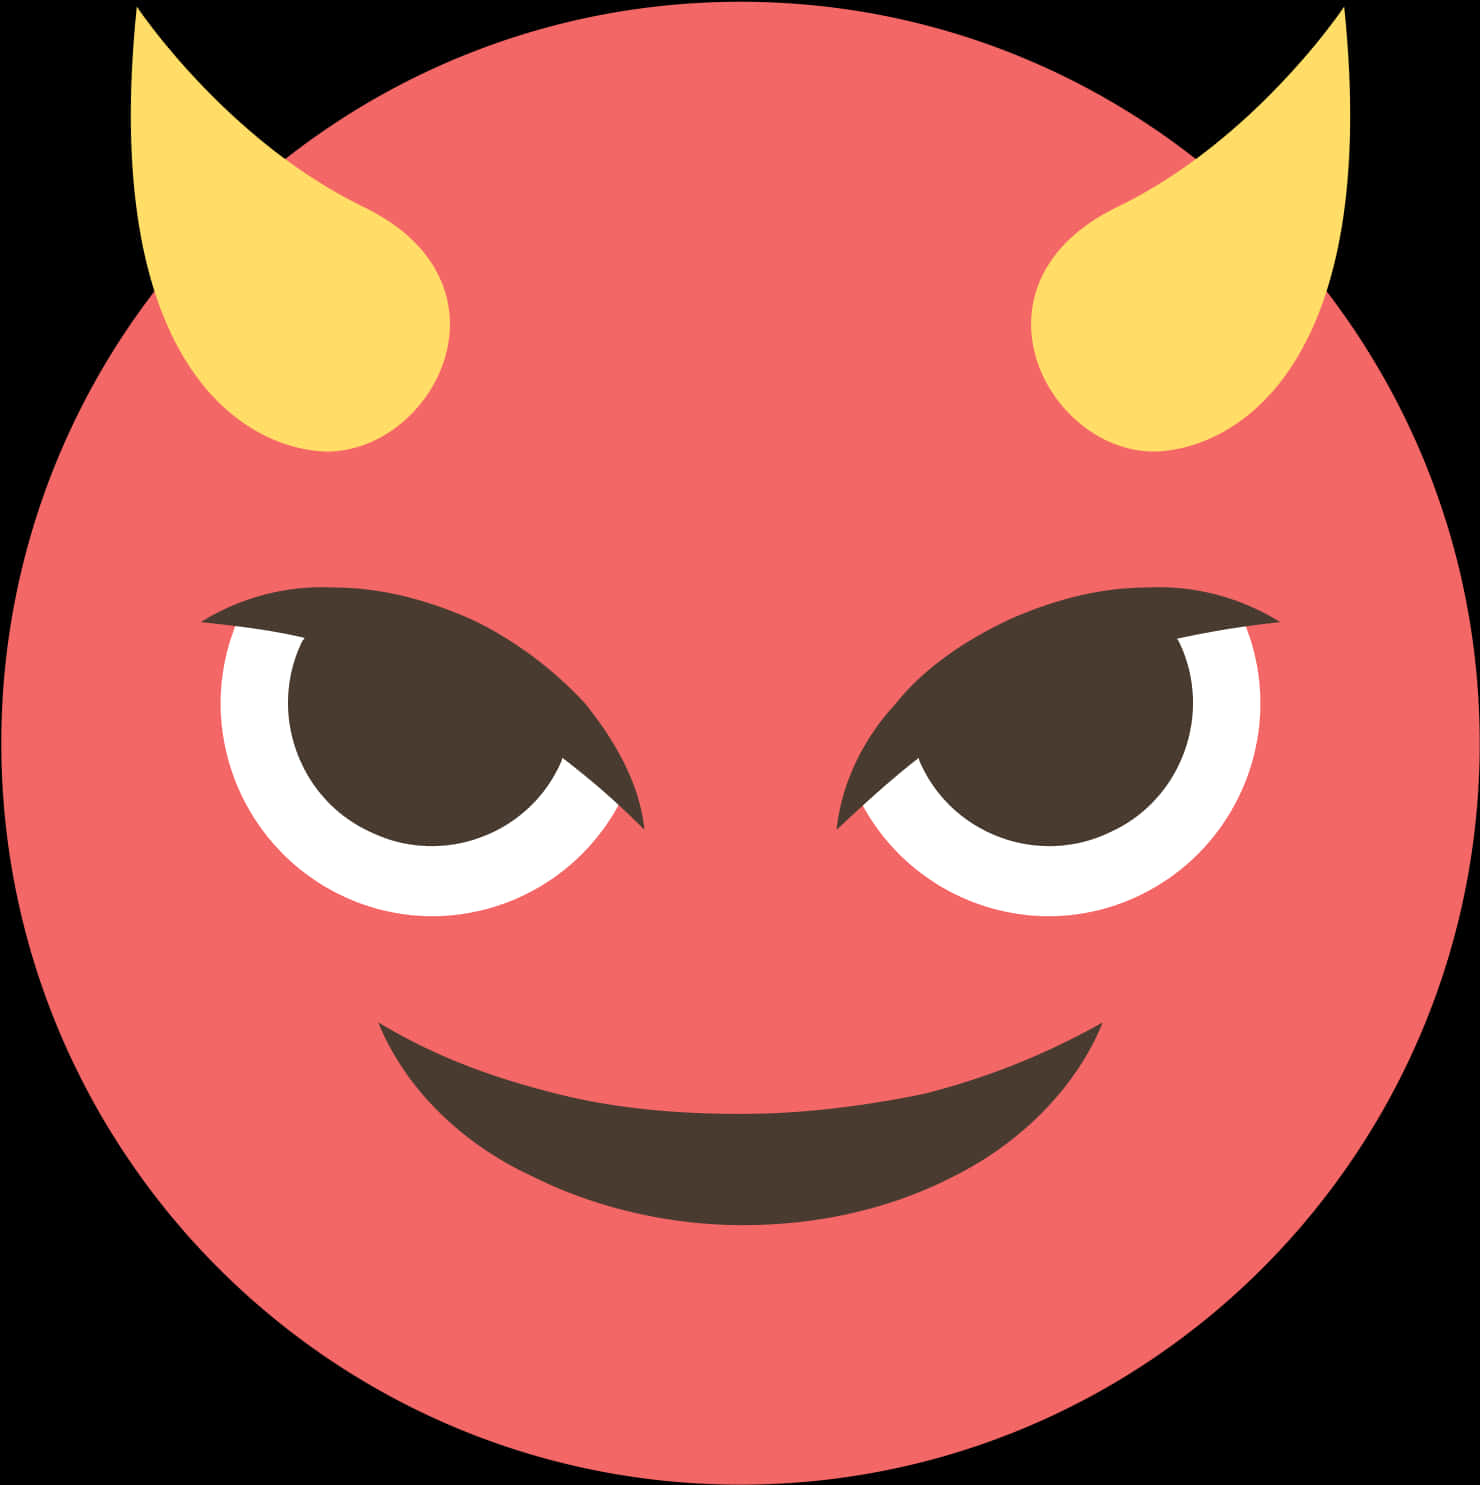 A Red Round Emoji With Yellow Horns